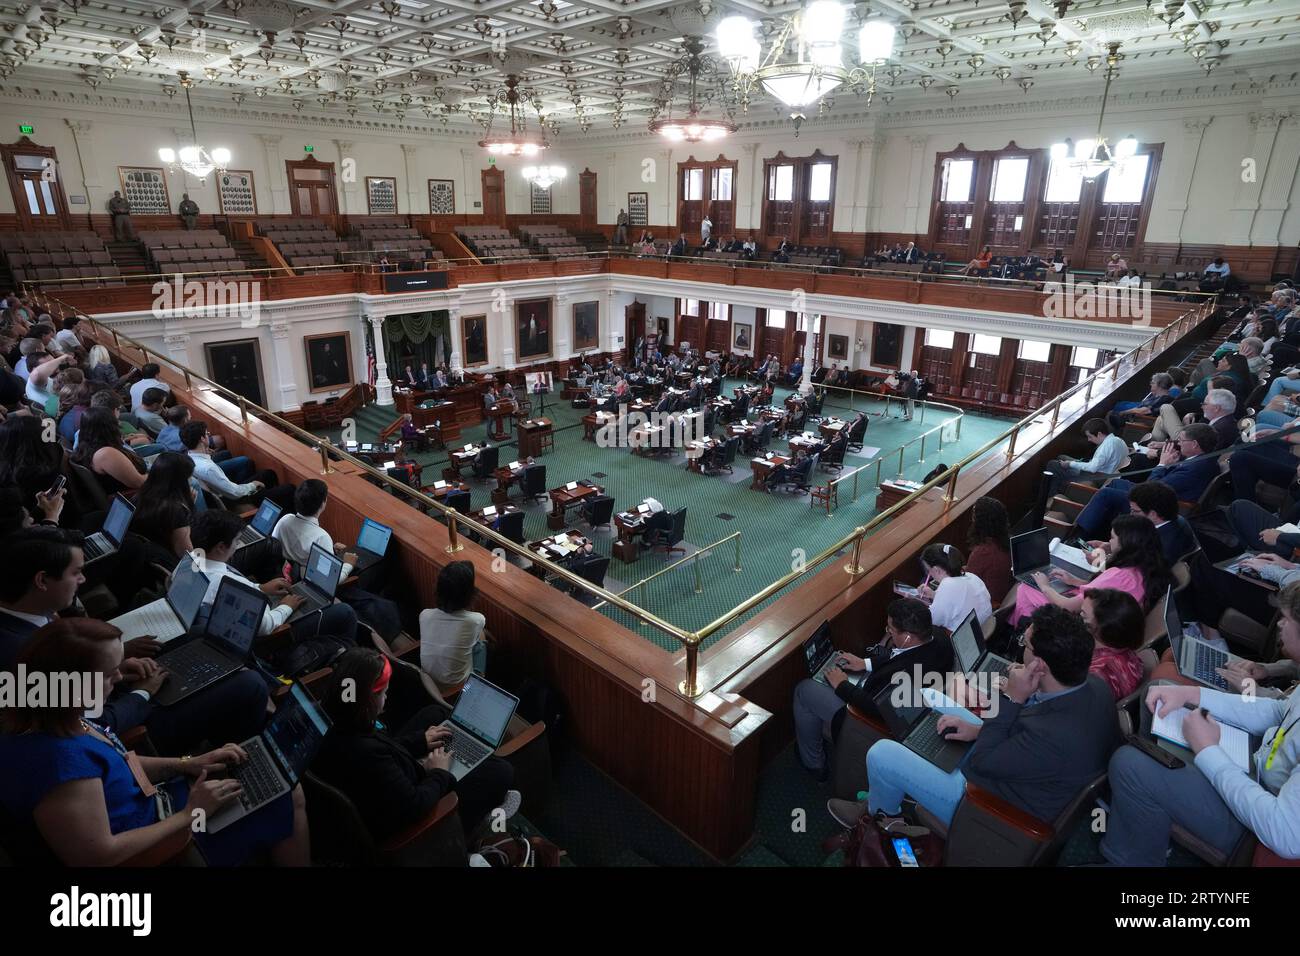 Austin Texas USA, September 15 2023: Final arguments are delivered on the Texas Senate floor as members of the press watch from the gallery during Texas Attorney General Ken Paxton's impeachment trial. The jury is deliberating the charges late Friday afternoon. Credit: Bob Daemmrich/Alamy Live News Stock Photo